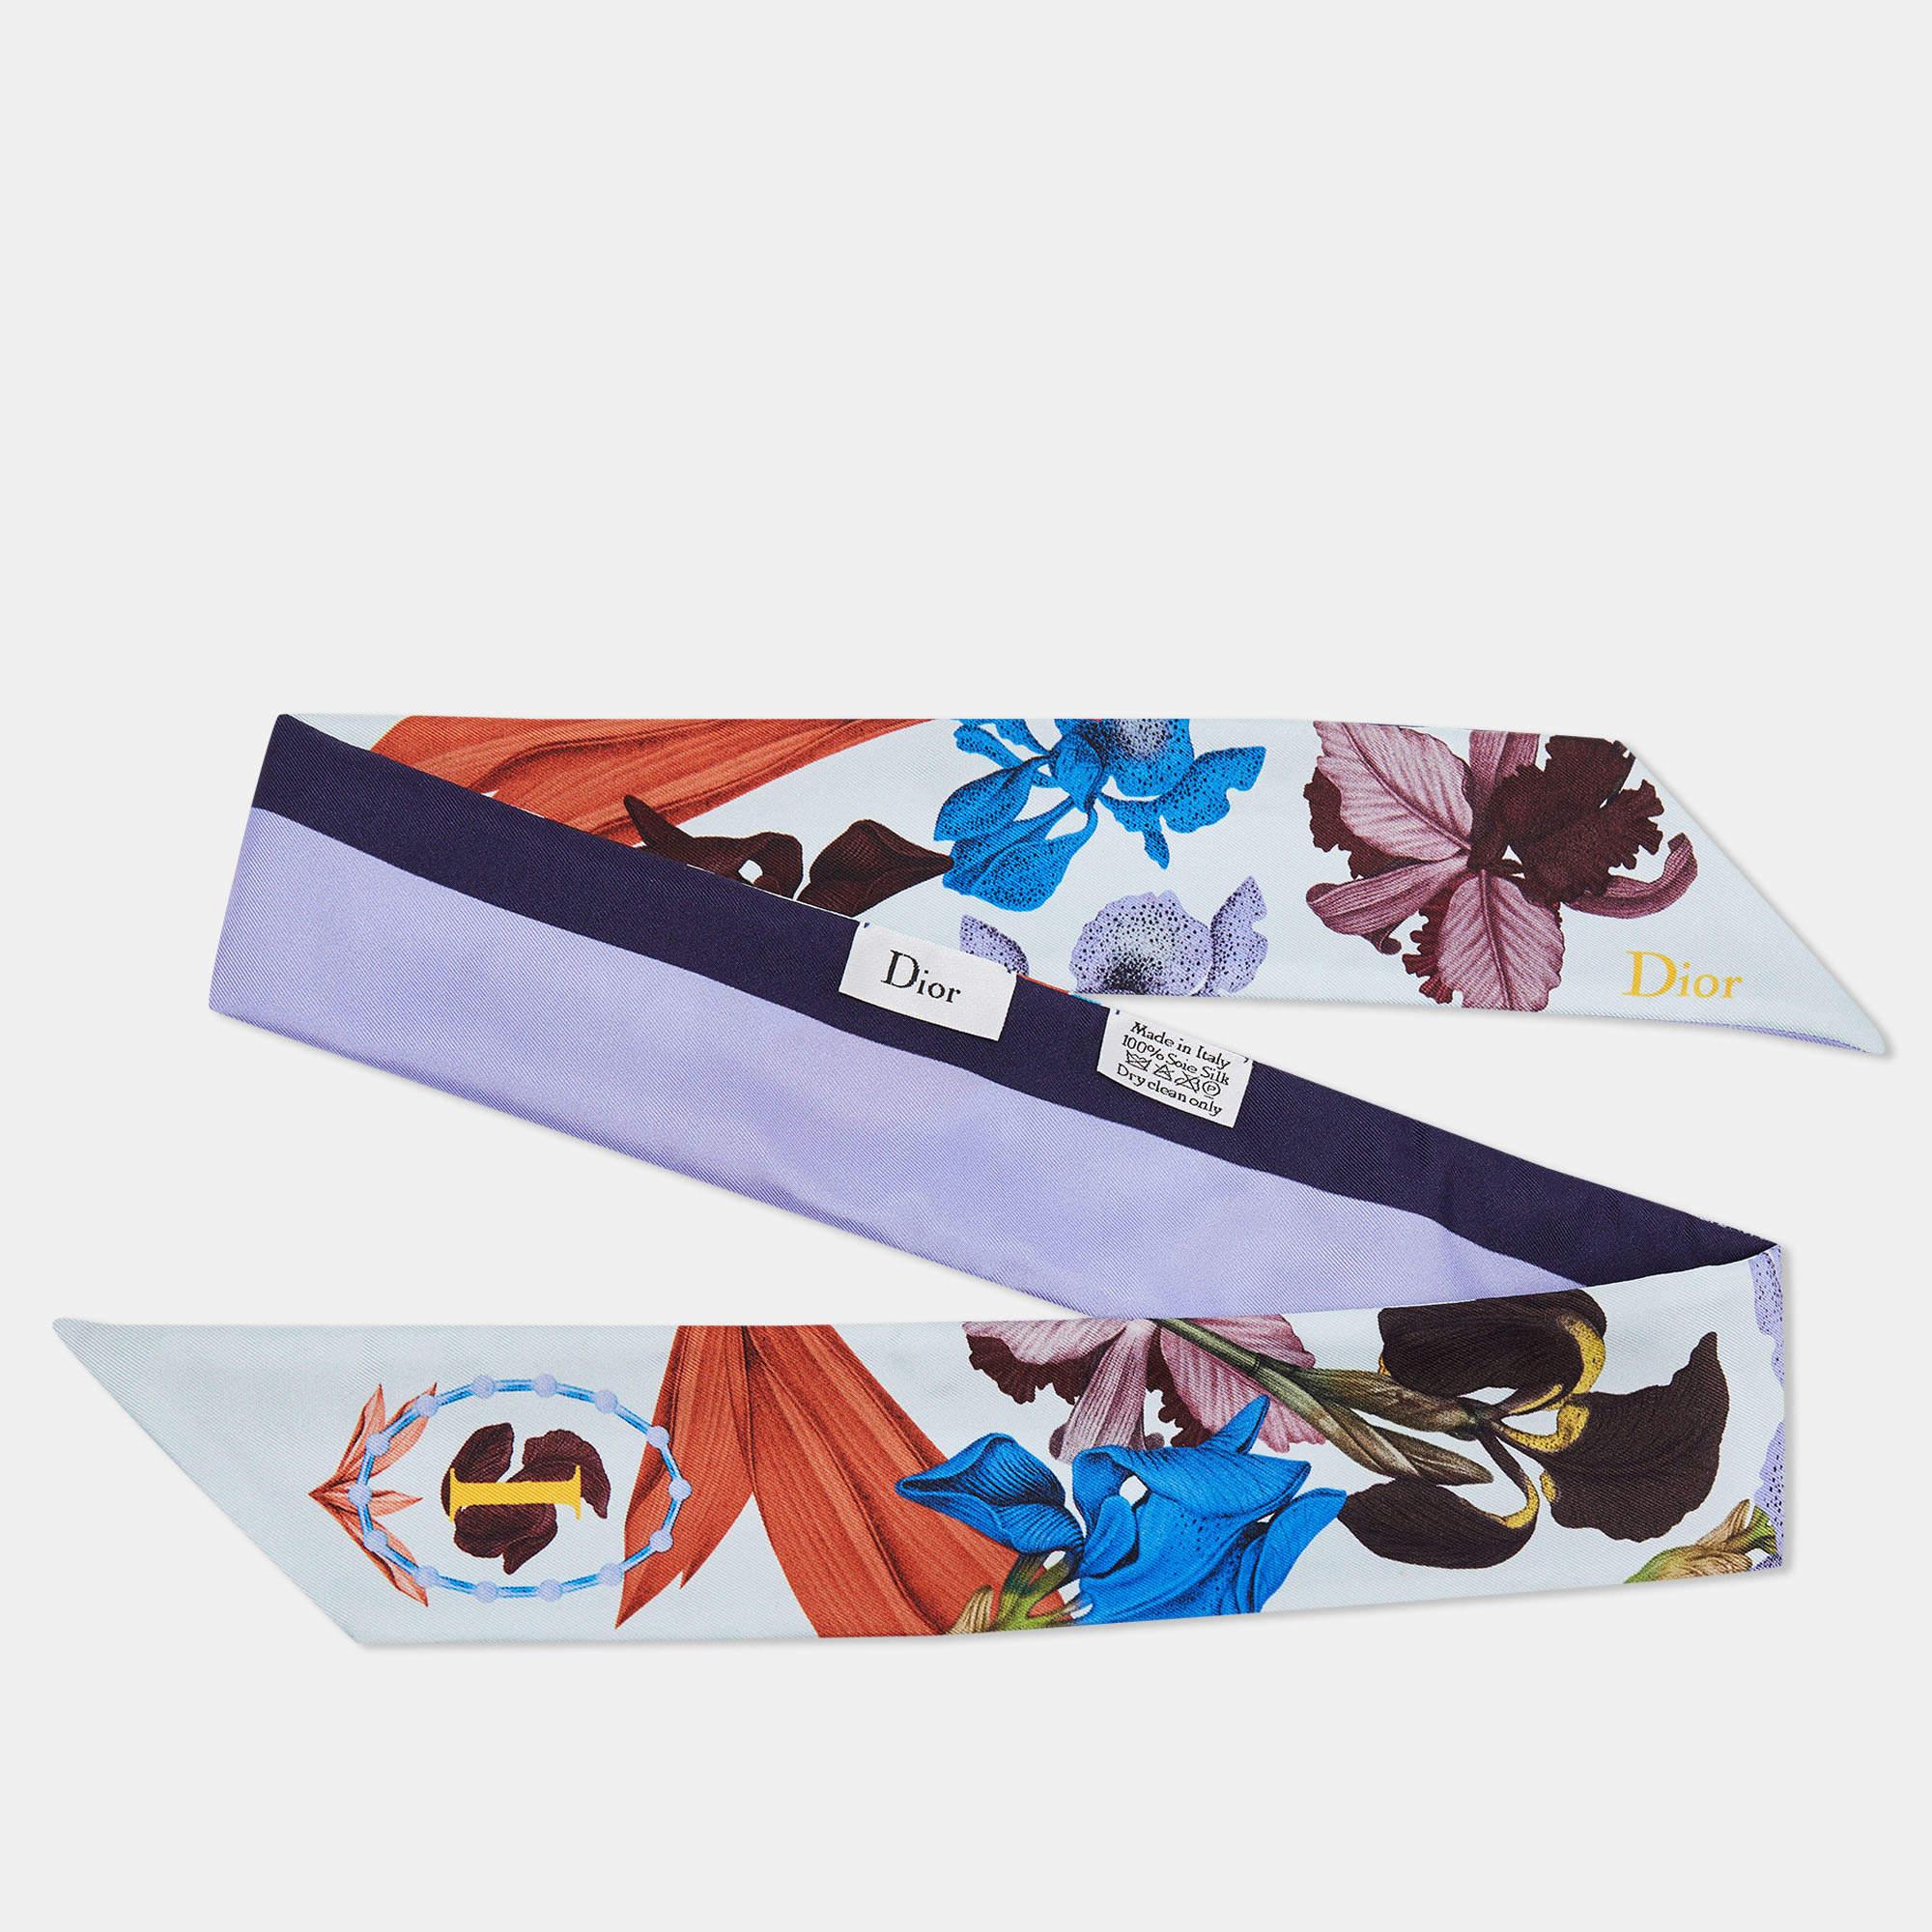 The Dior Blue ABCDior 'I' for Iris Floral Print Silk Mitzah Scarf is a luxurious accessory that features a stunning floral print with blue hues. Made from high-quality silk, it is adorned with the letter 'I' and is a versatile, elegant addition to